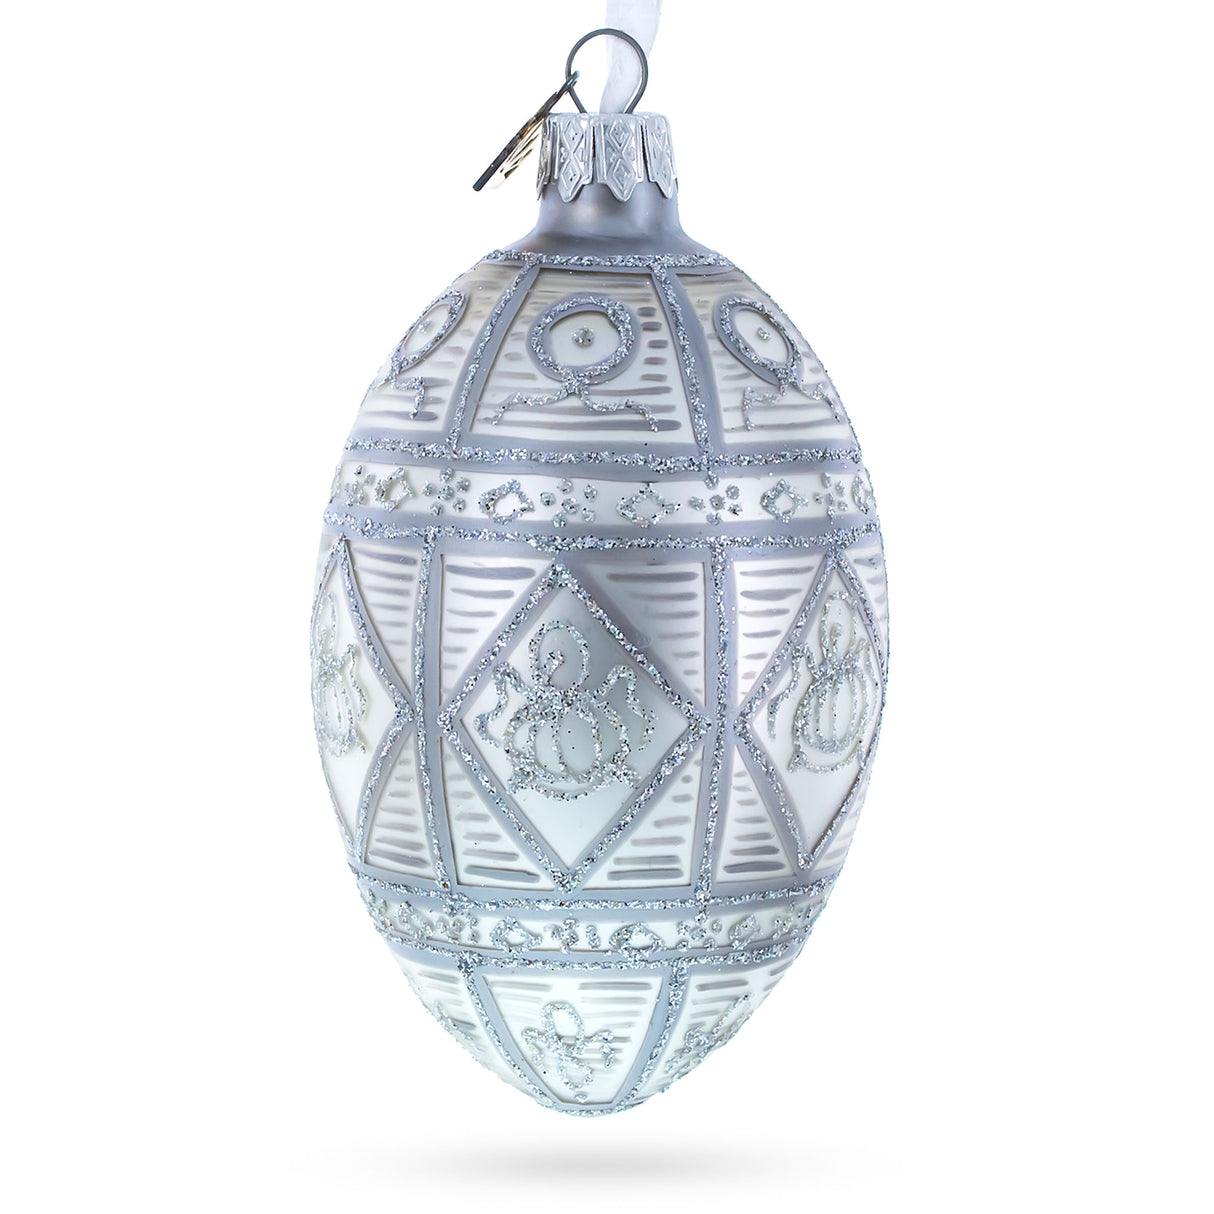 1909 Alexander III Commemorative Royal Egg Glass Ornament 4 Inches in White color, Oval shape